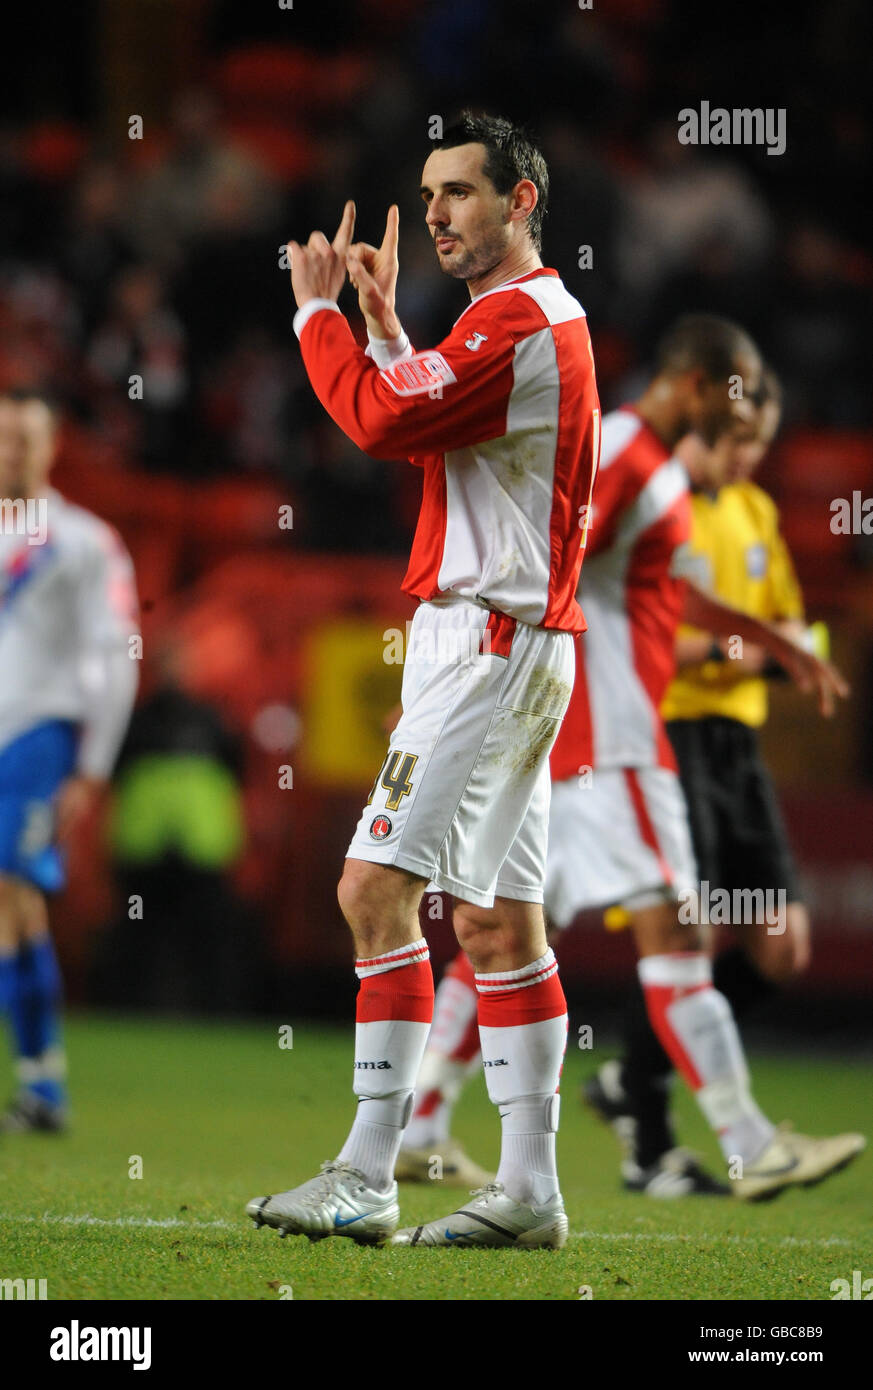 Soccer - Coca-Cola Football League Championship - Charlton Athletic v Crystal Palace - The Valley. Charlton Athletic's Matthew Spring after scoring their first goal Stock Photo